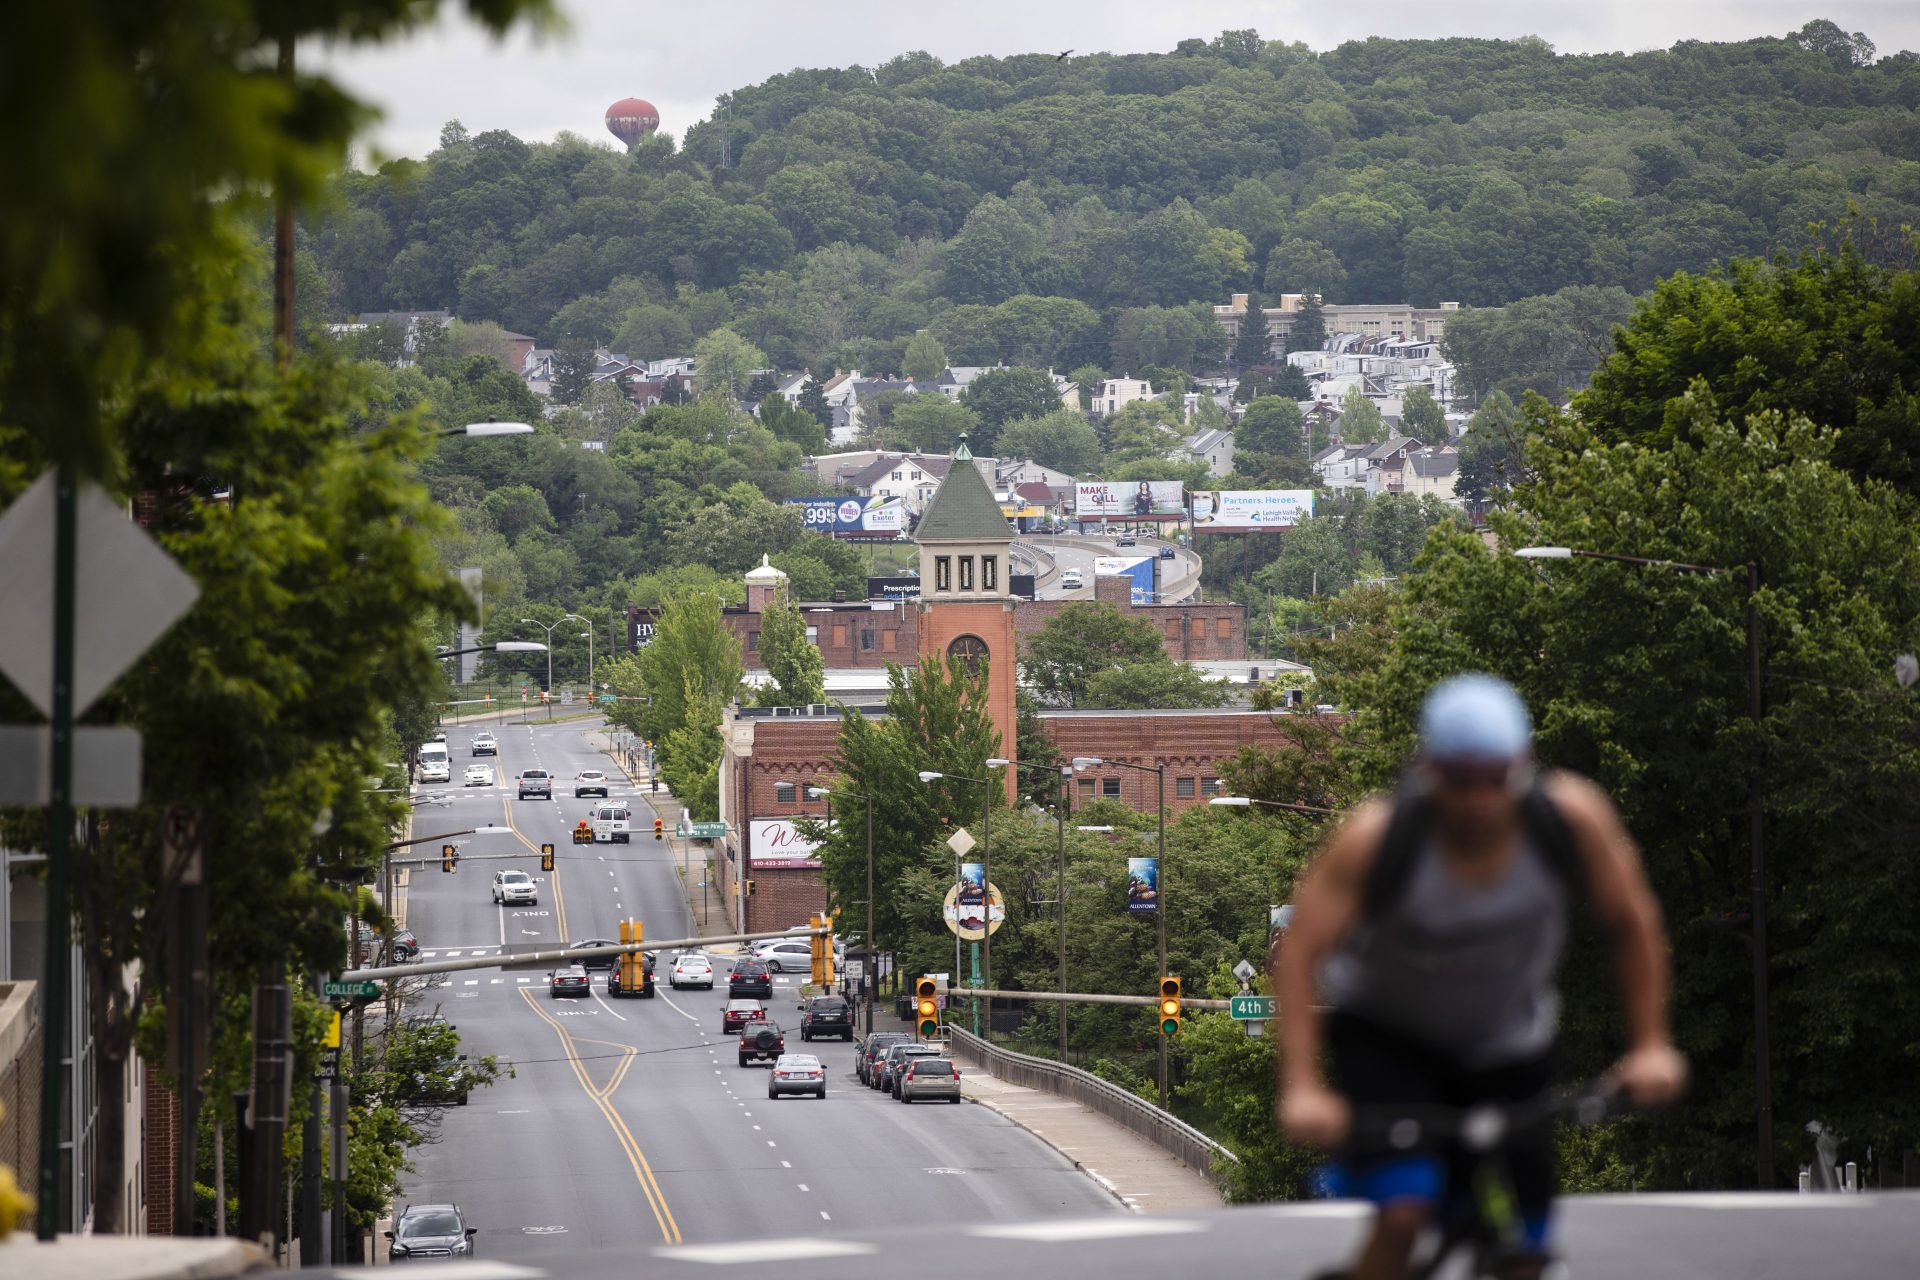 A cyclist pedals up a hill in Allentown, Pa., Friday, May 29, 2020. Allentown predicts a budget deficit of over $10 million, a number officials say could go higher if the economy doesn’t rebound quickly. 